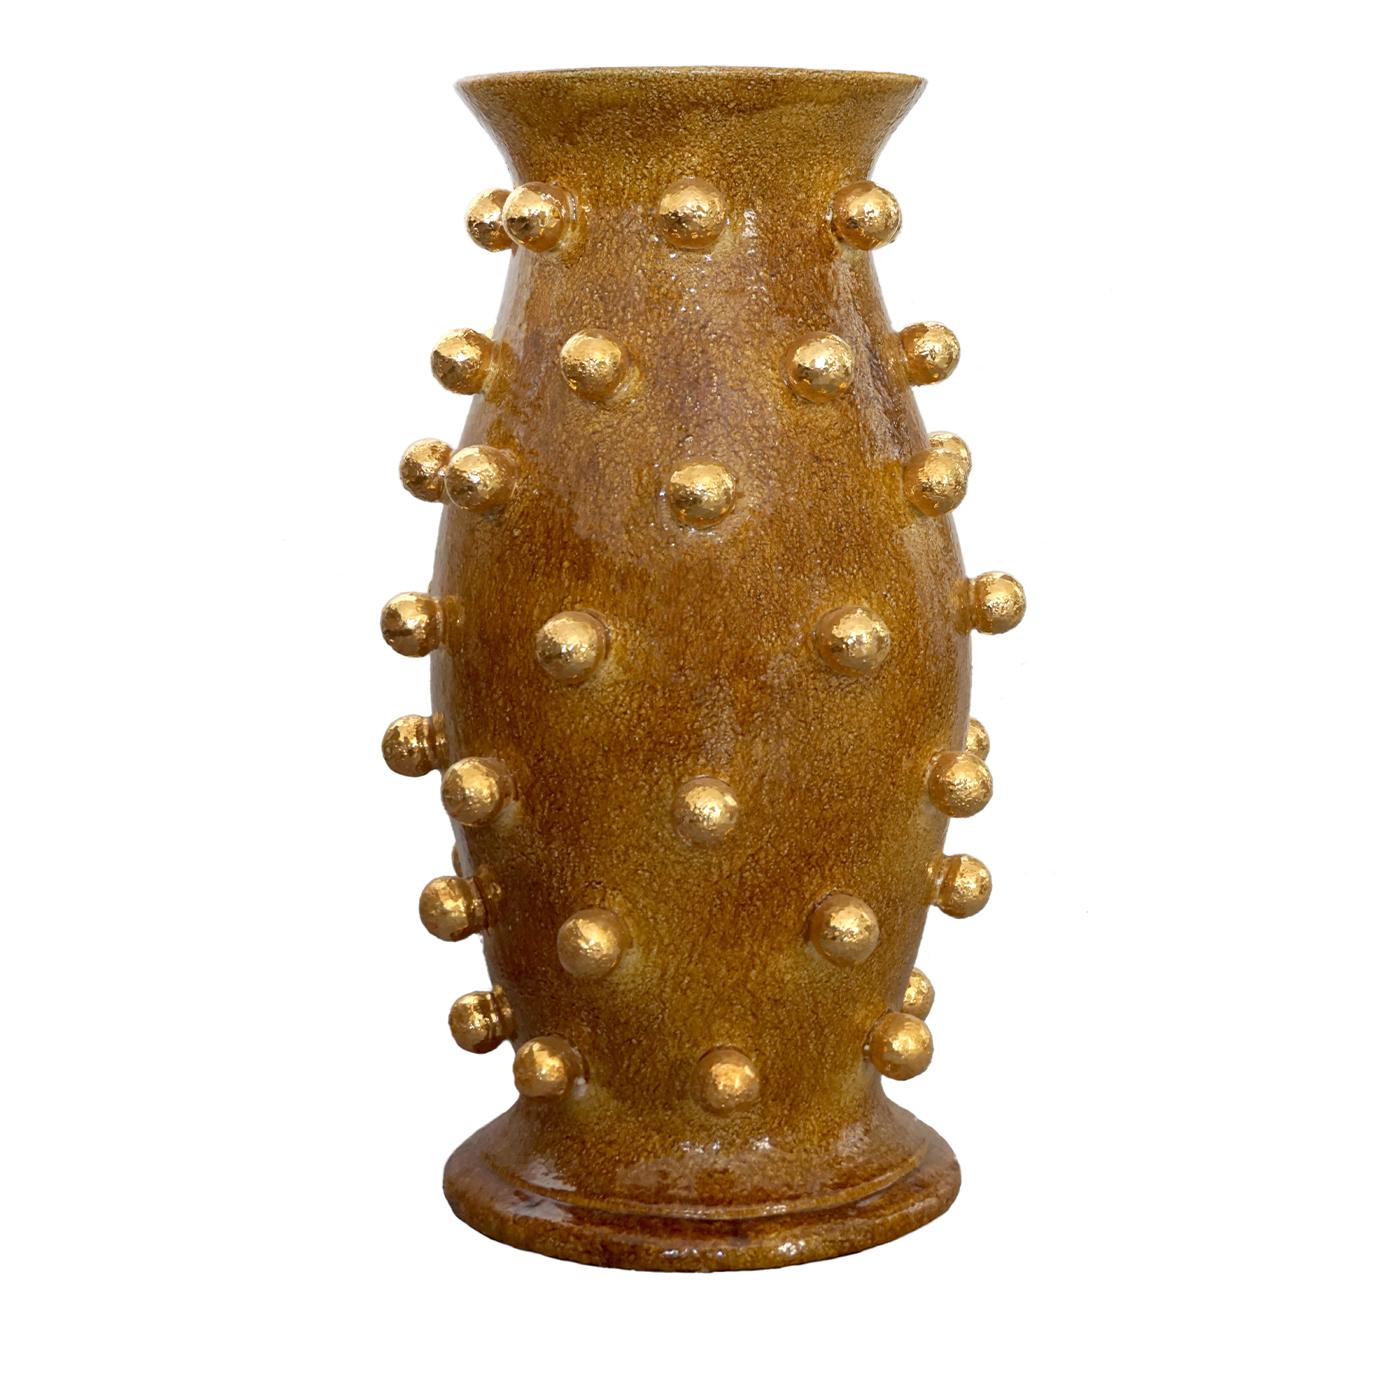 The award-winning Ceramiche ND Dolfi specializes in Majolica pottery. This 2001 handcrafted and turned accent vase in high quality mustard yellow ceramic is enhanced by pure gold spheres all around. Its modern, luxury and attention-grabbing shape is